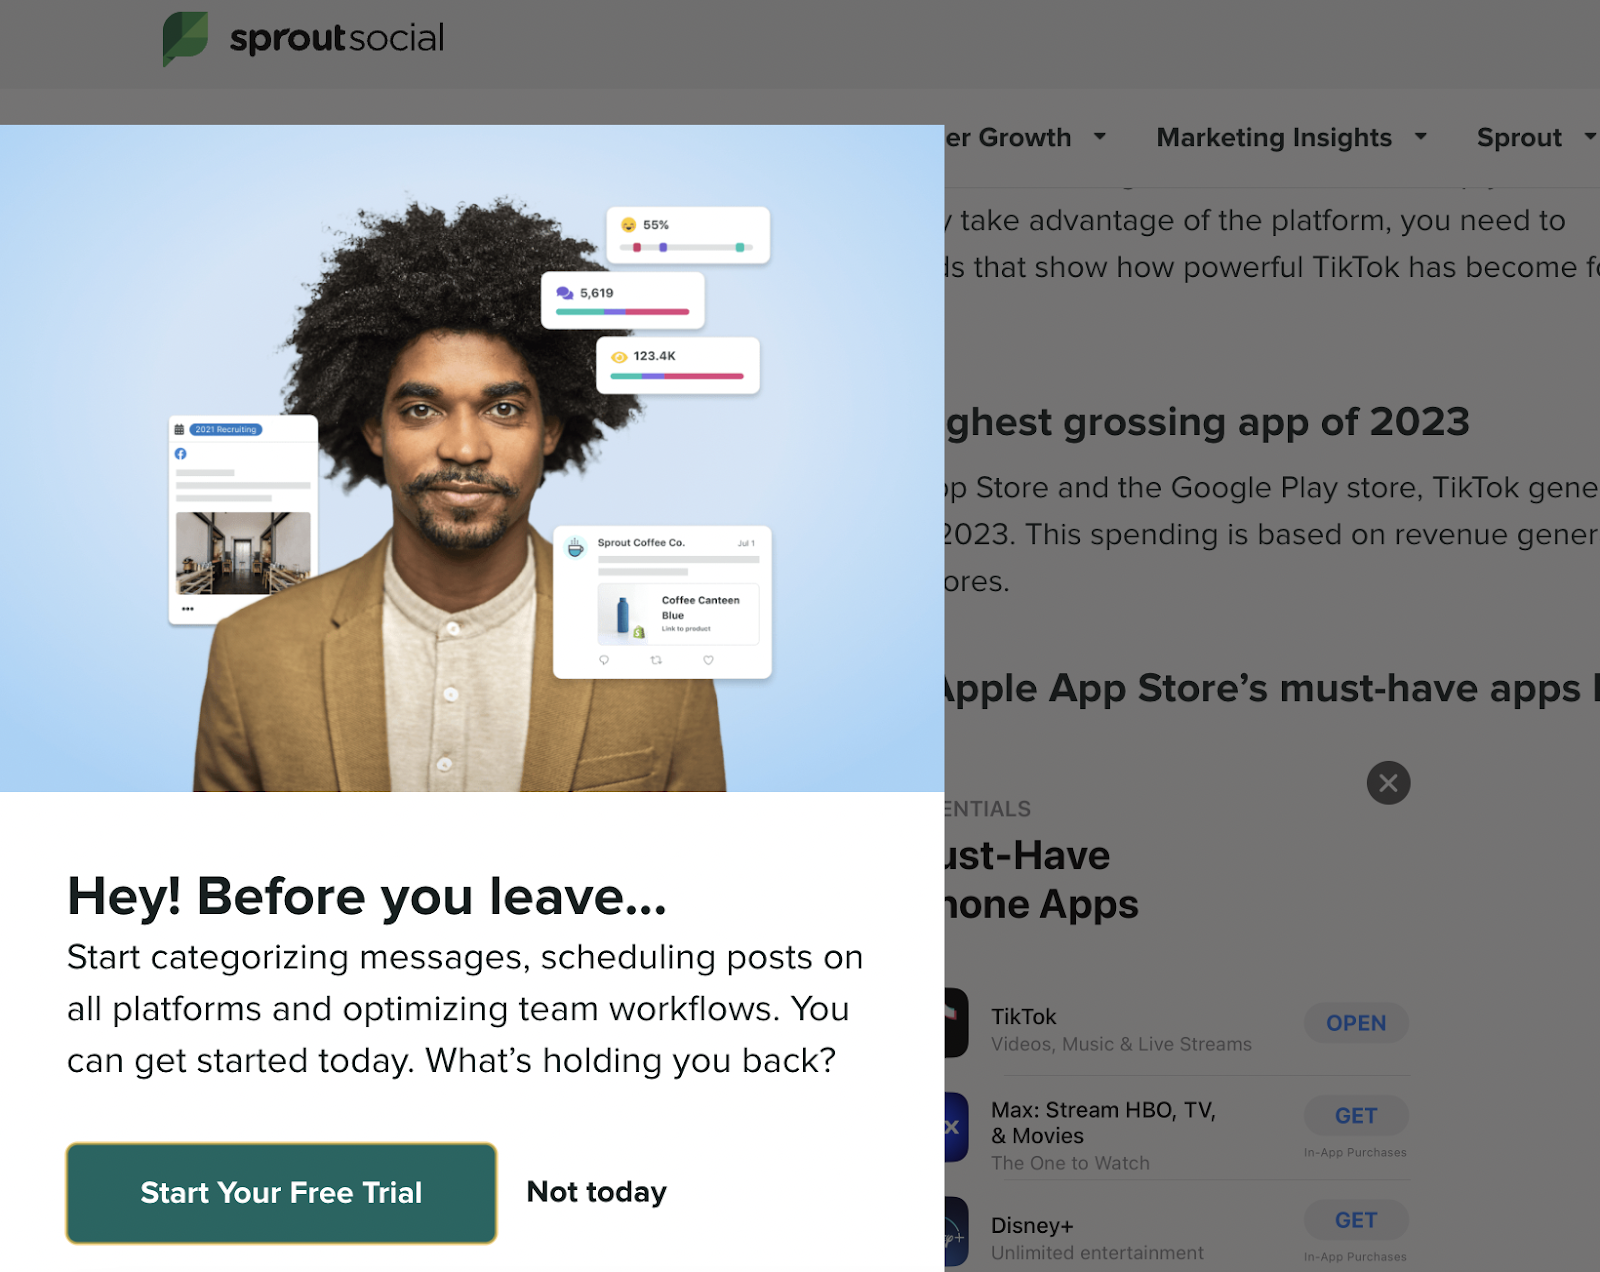 Sprout Social targets blog readers